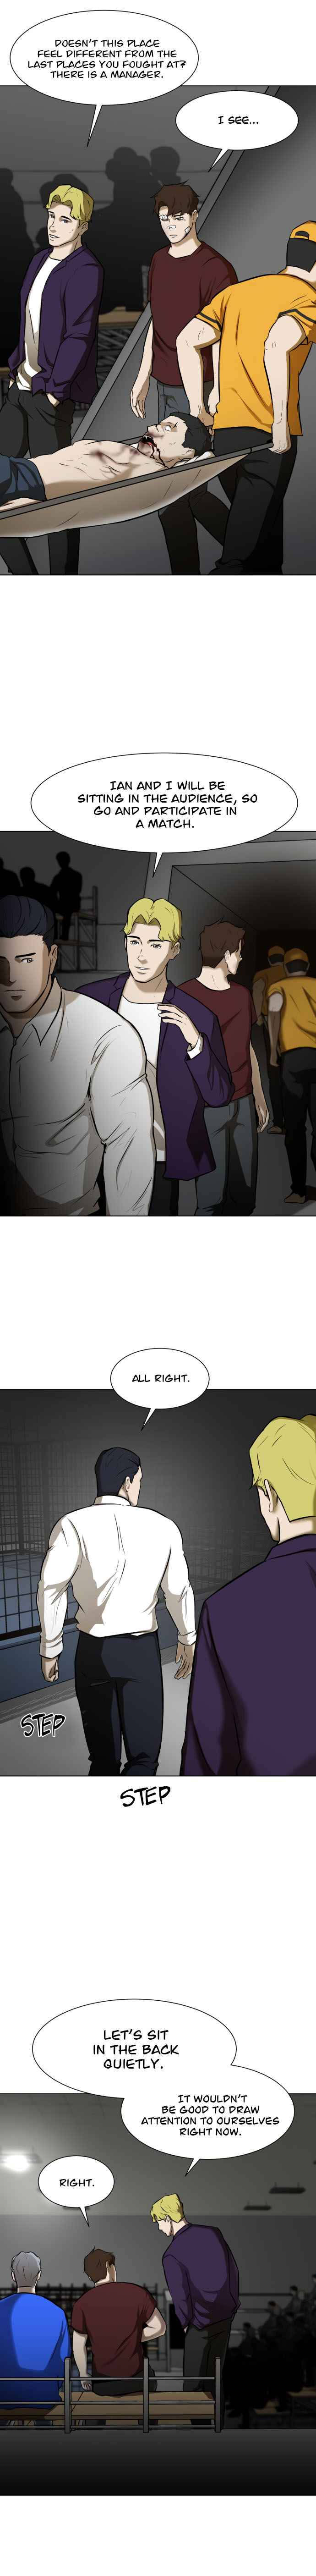 Zombie Fight - Page 3